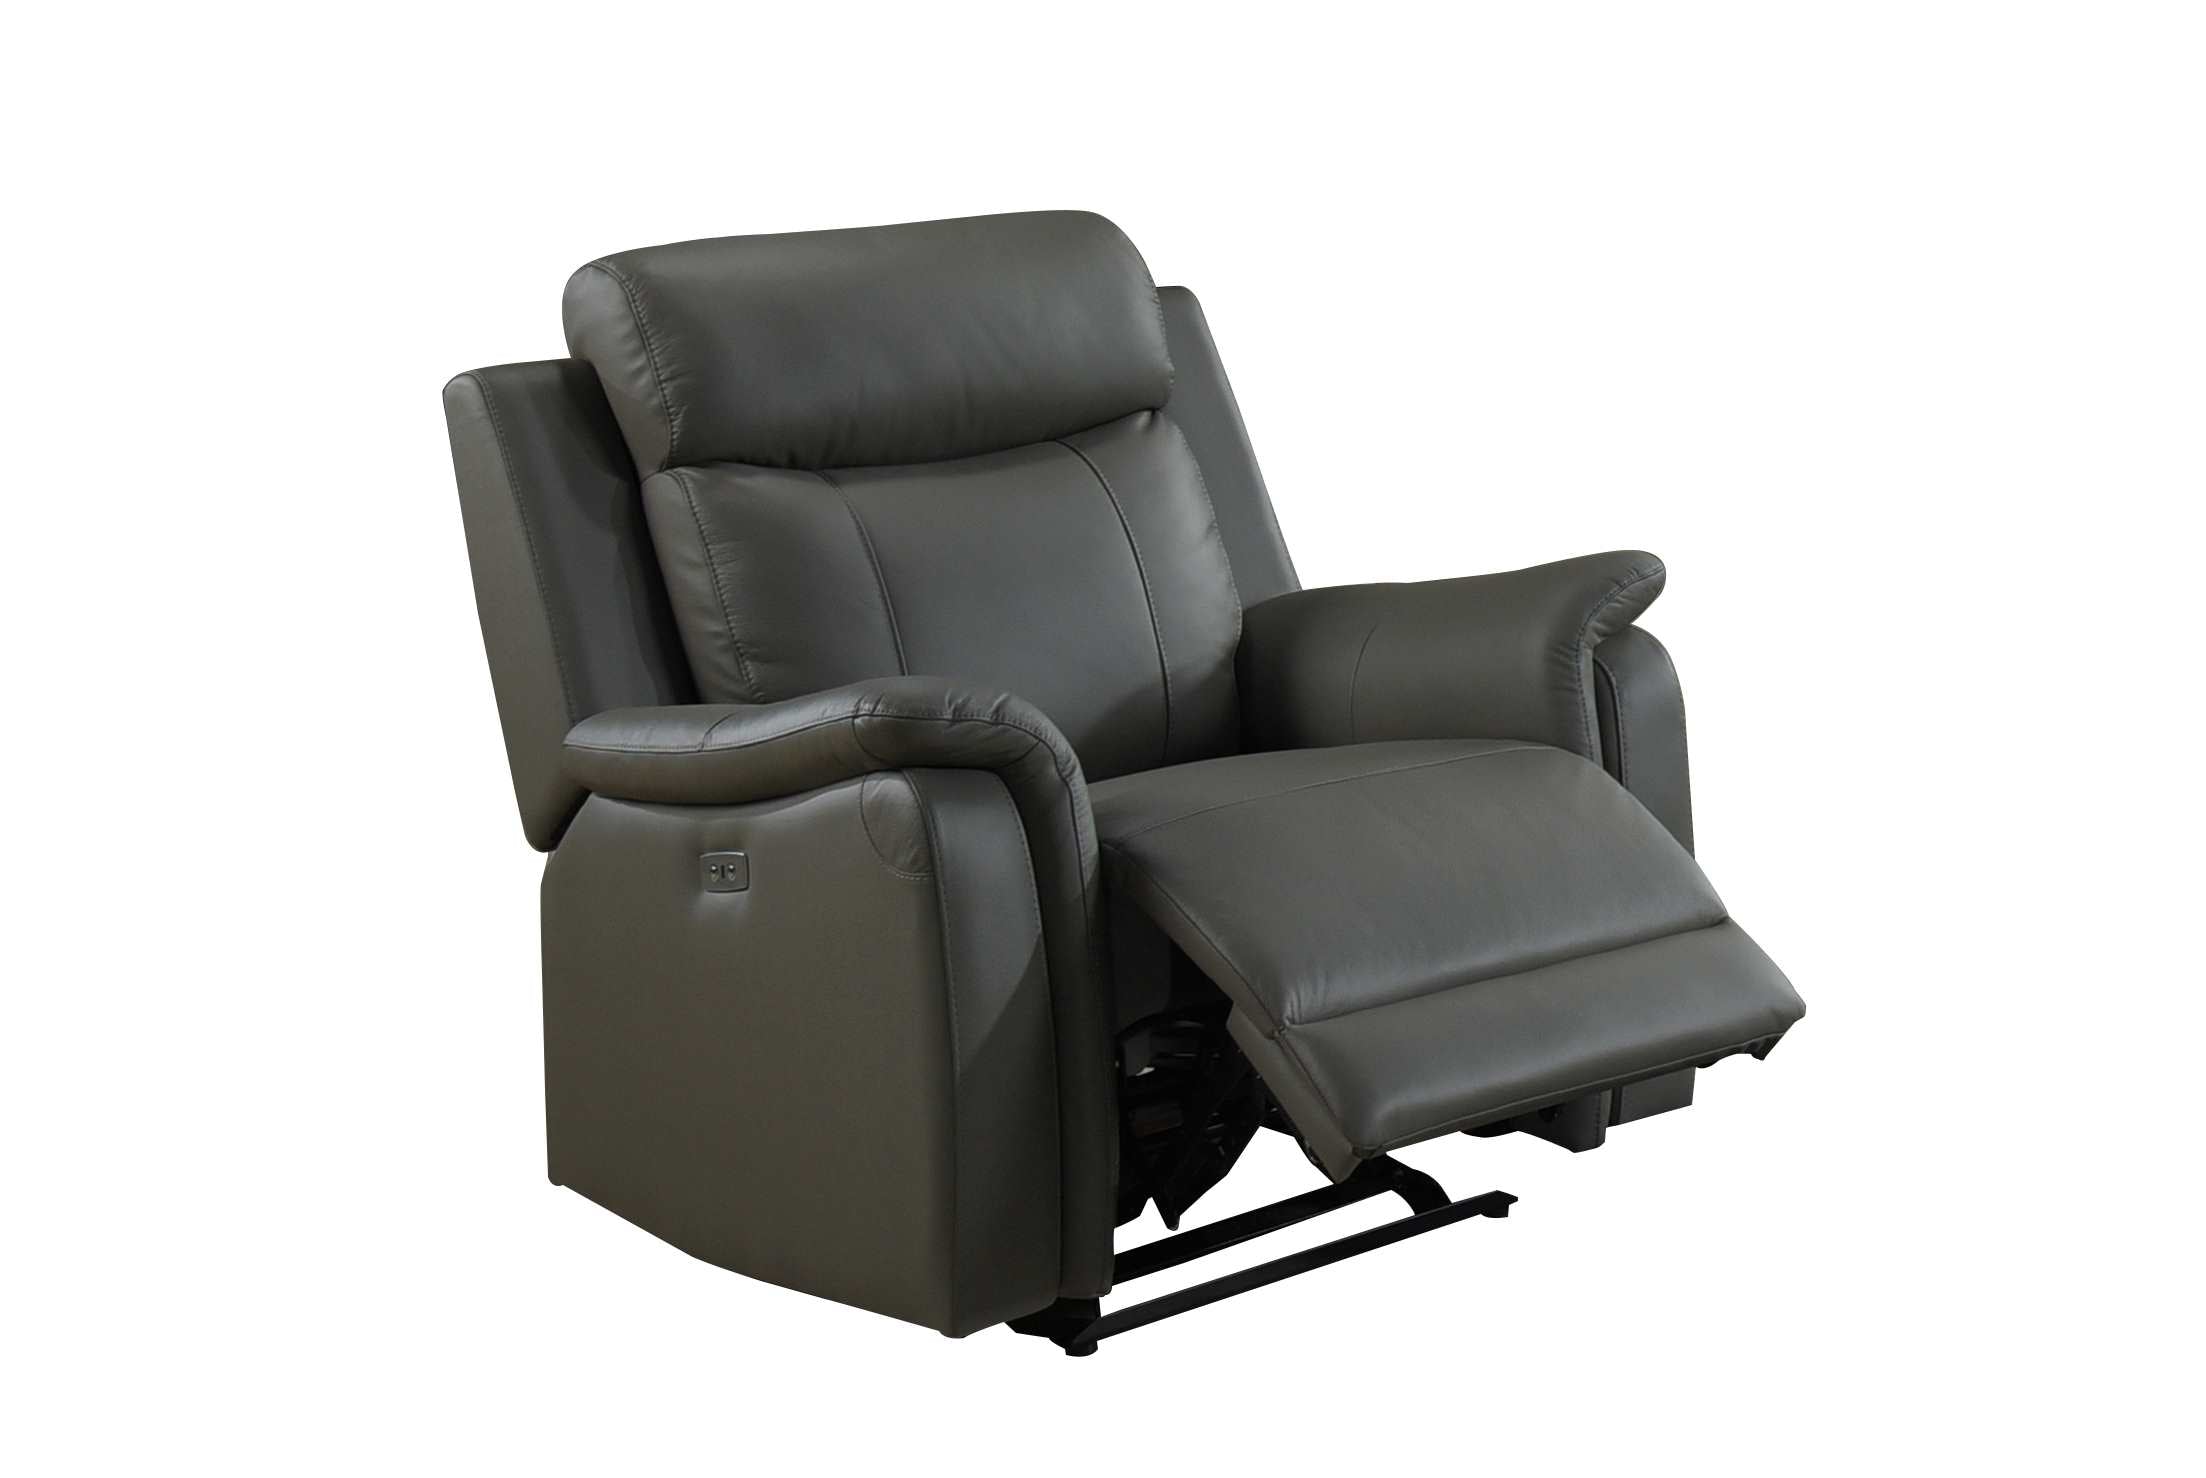 Cyrus Top Grain Leather Power Reclining Chair Grey 99840